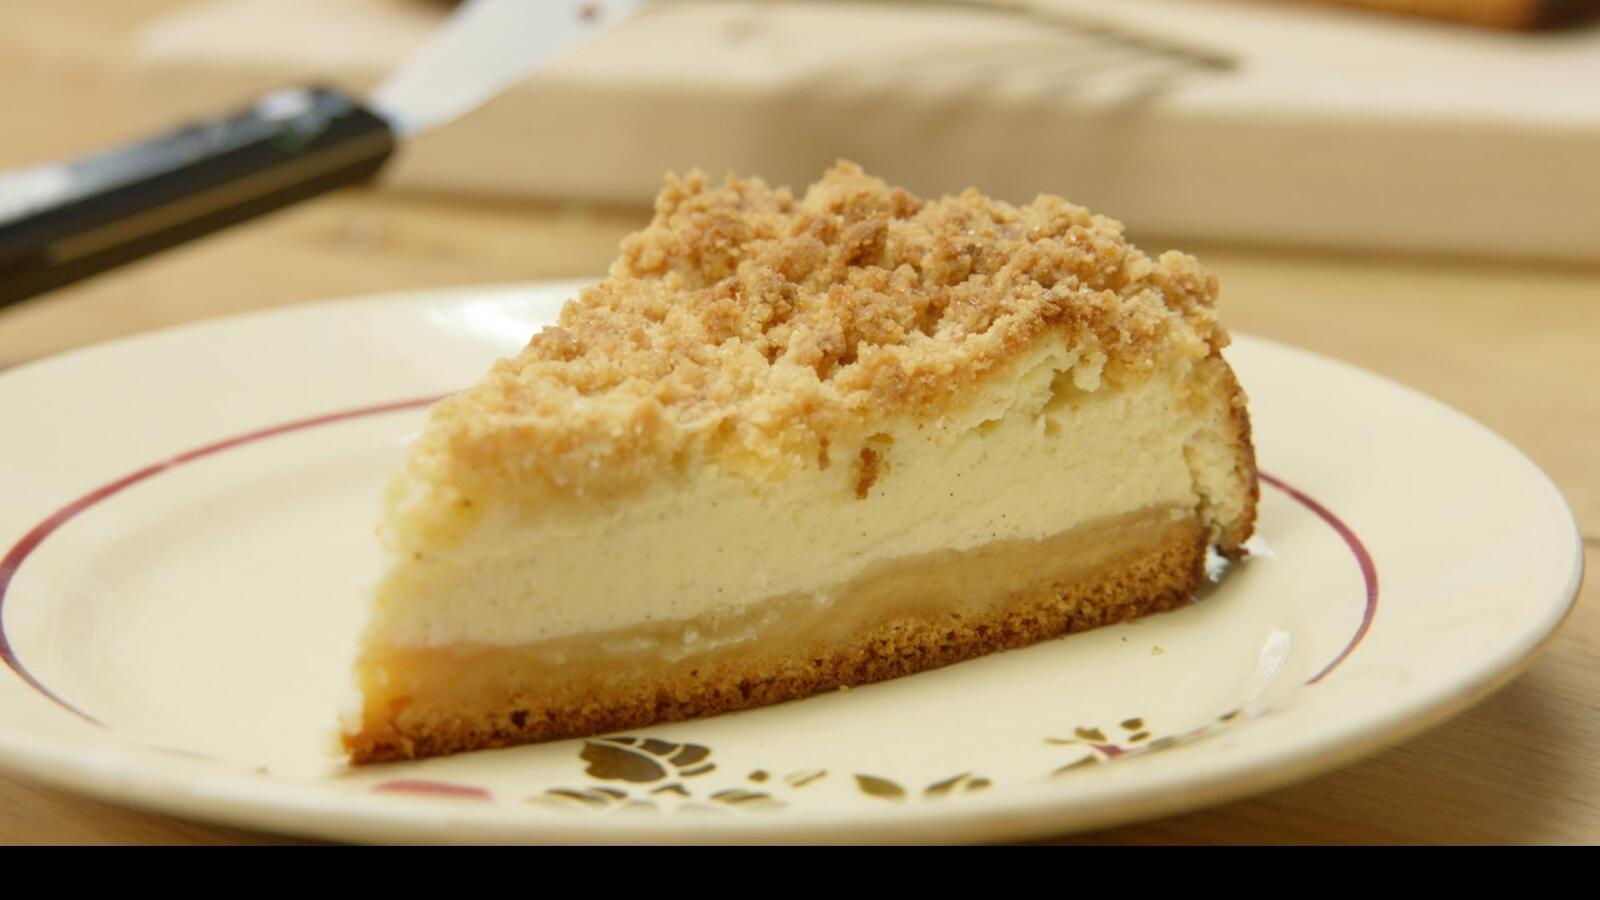 Appelcrumble cheesecake